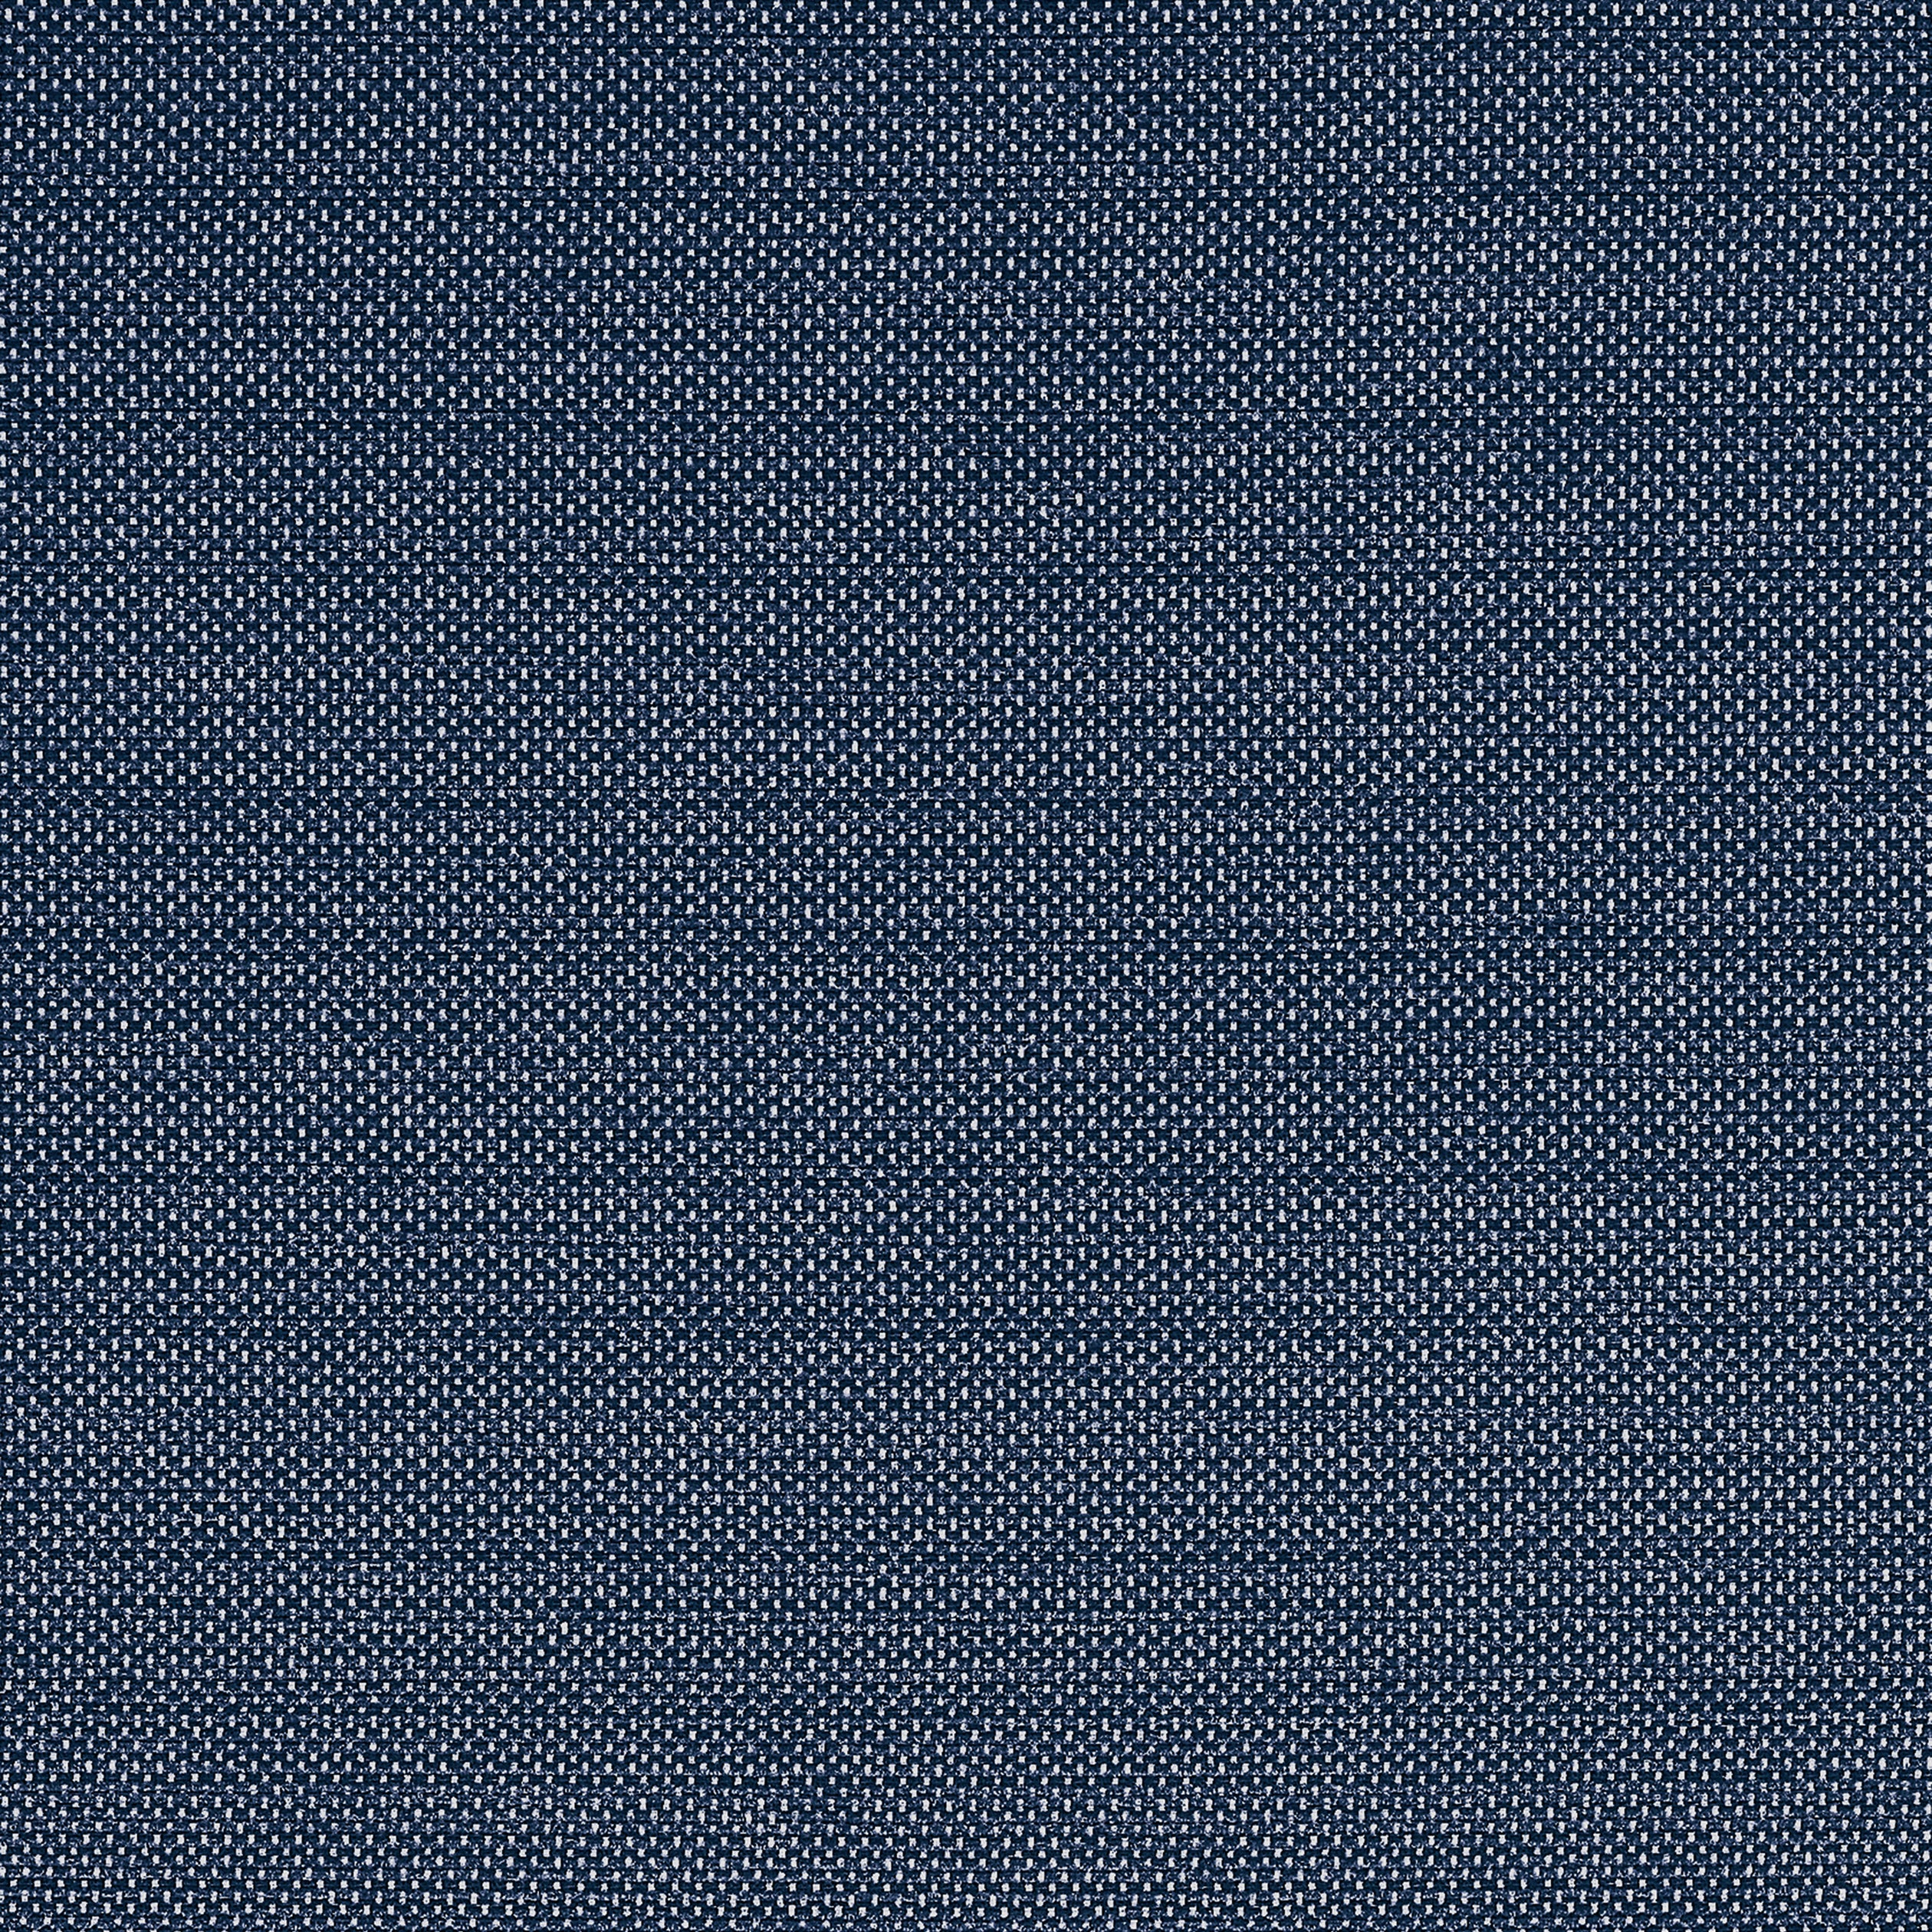 Cameron fabric in navy color - pattern number W81649 - by Thibaut in the Locale collection